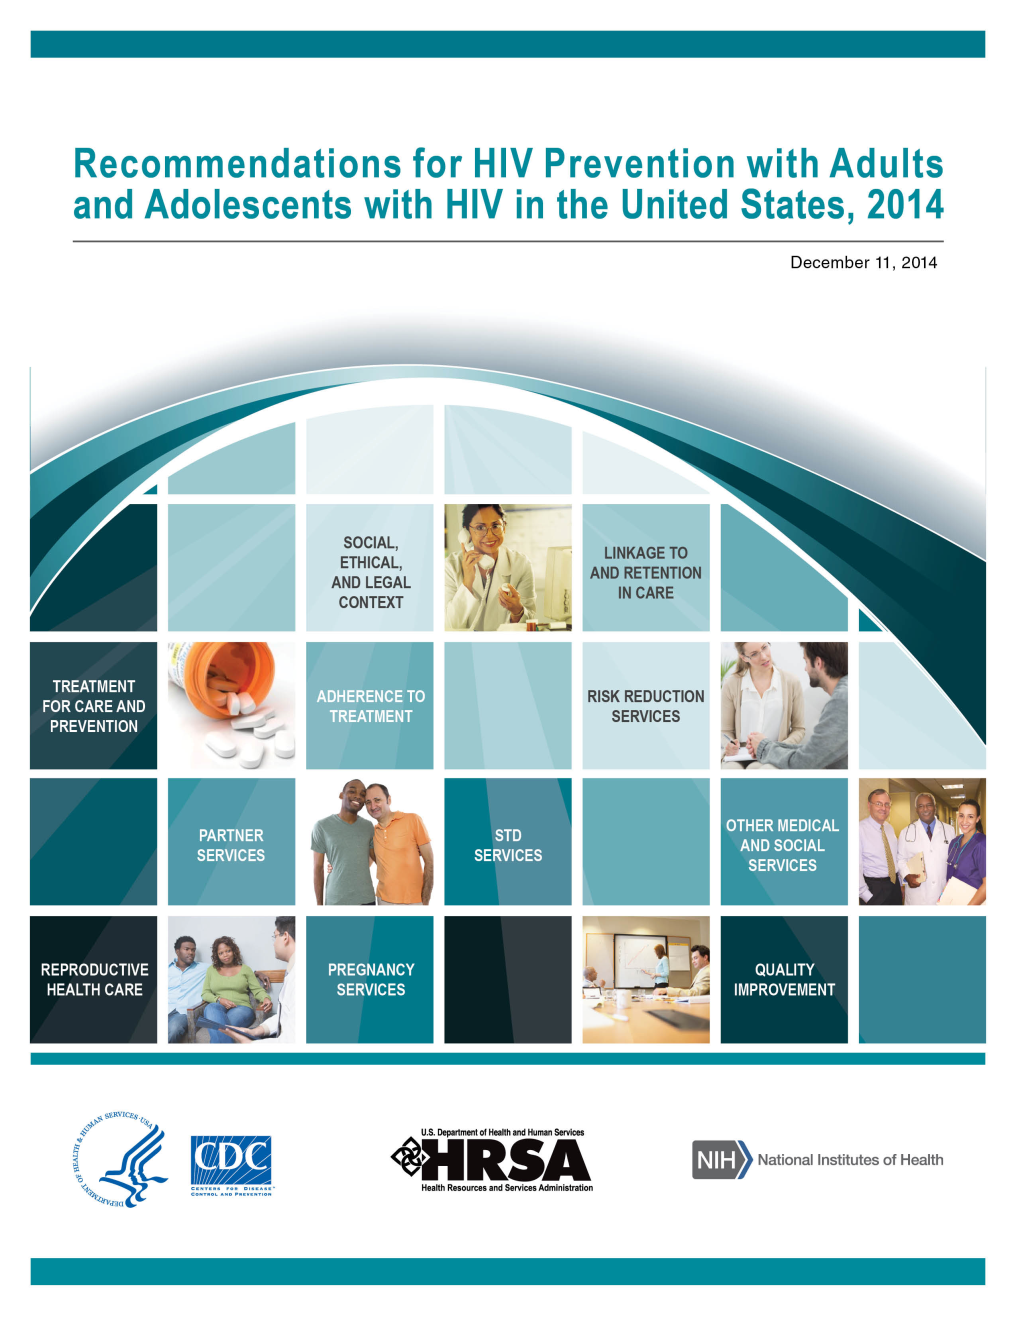 Recommendations for HIV Prevention with Adults and Adolescents Living